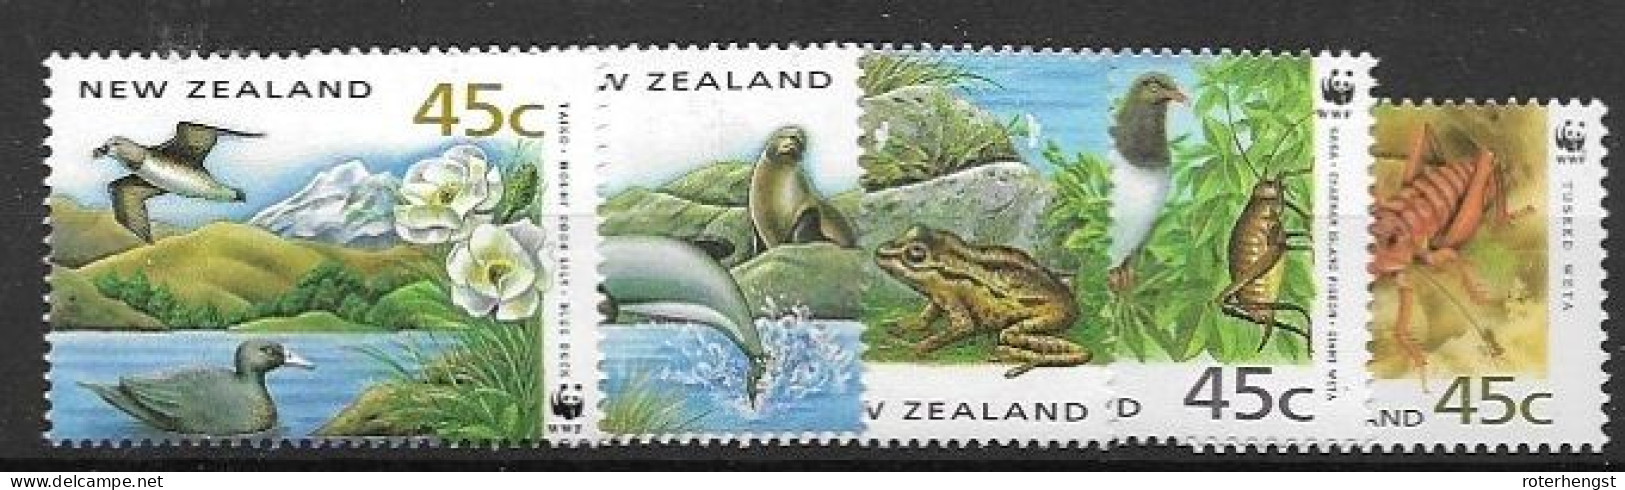 New Zealand Mnh ** Set 1993 WWF Animals Birds Set Frog Seal Insects - Neufs